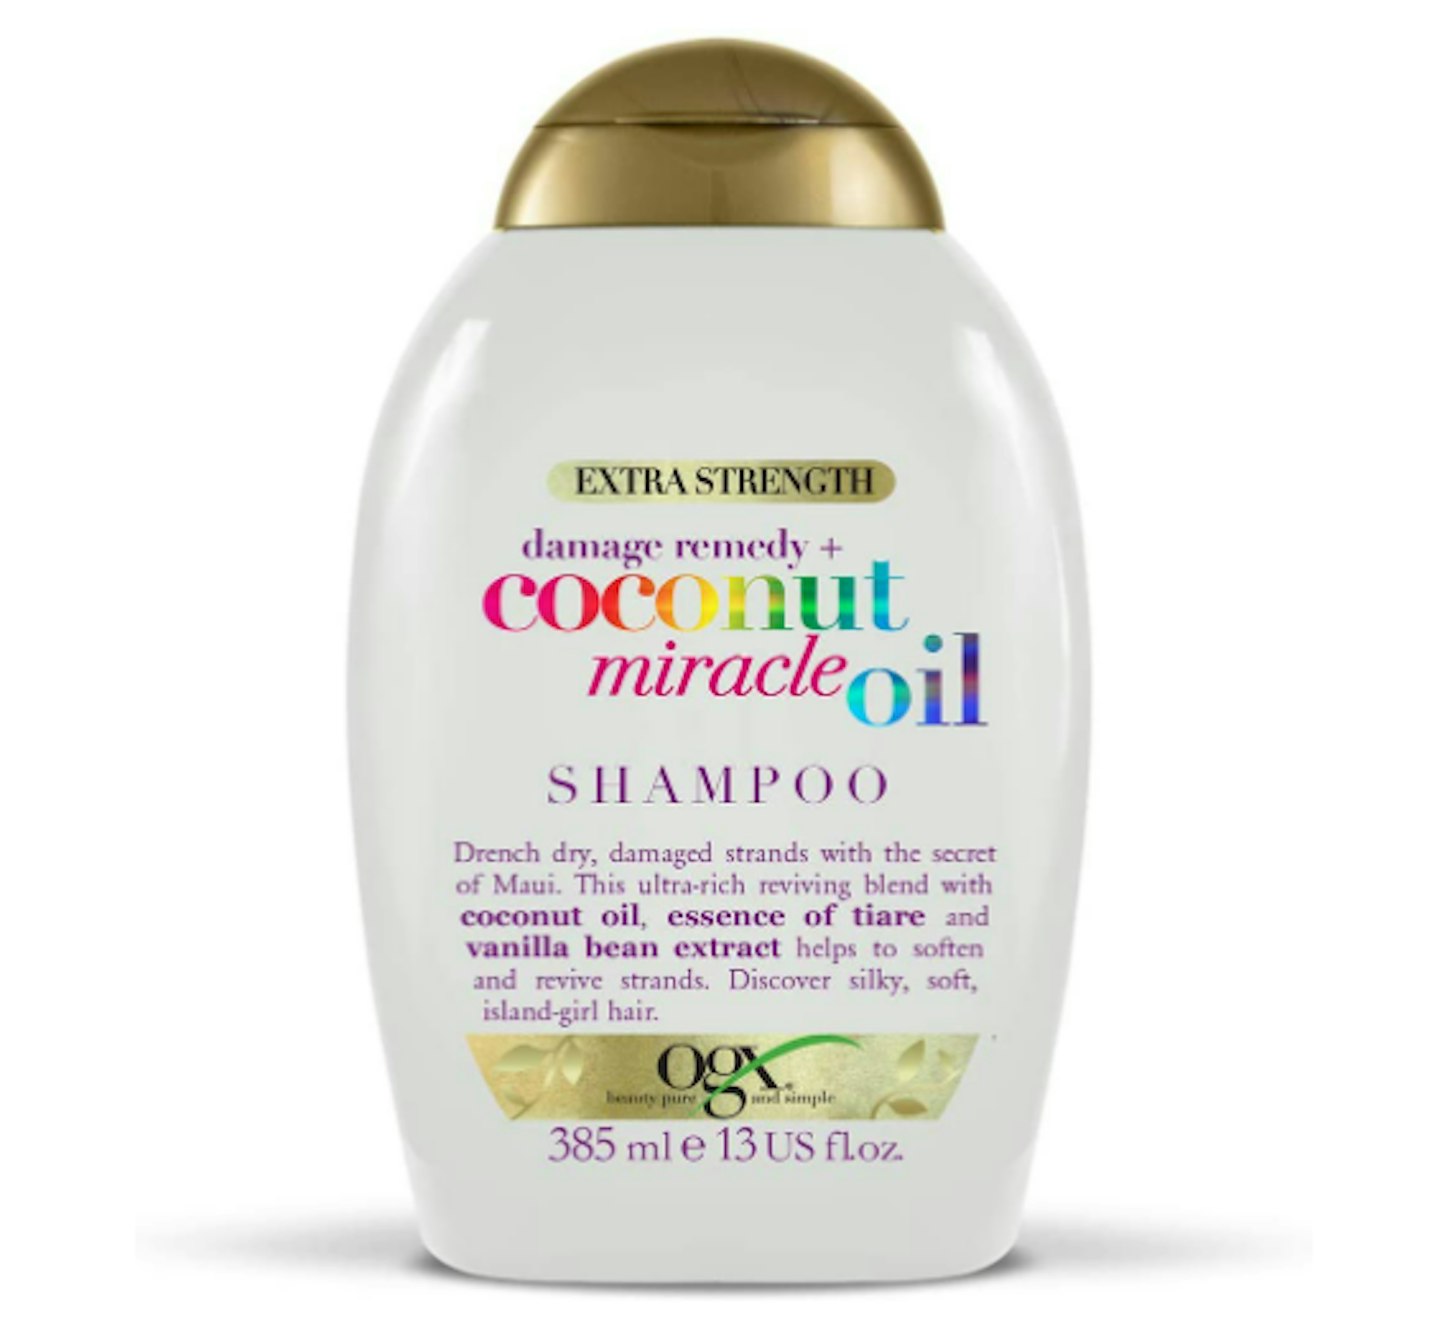 OGX Coconut Miracle Oil Shampoo for Damaged Hair, 385ml